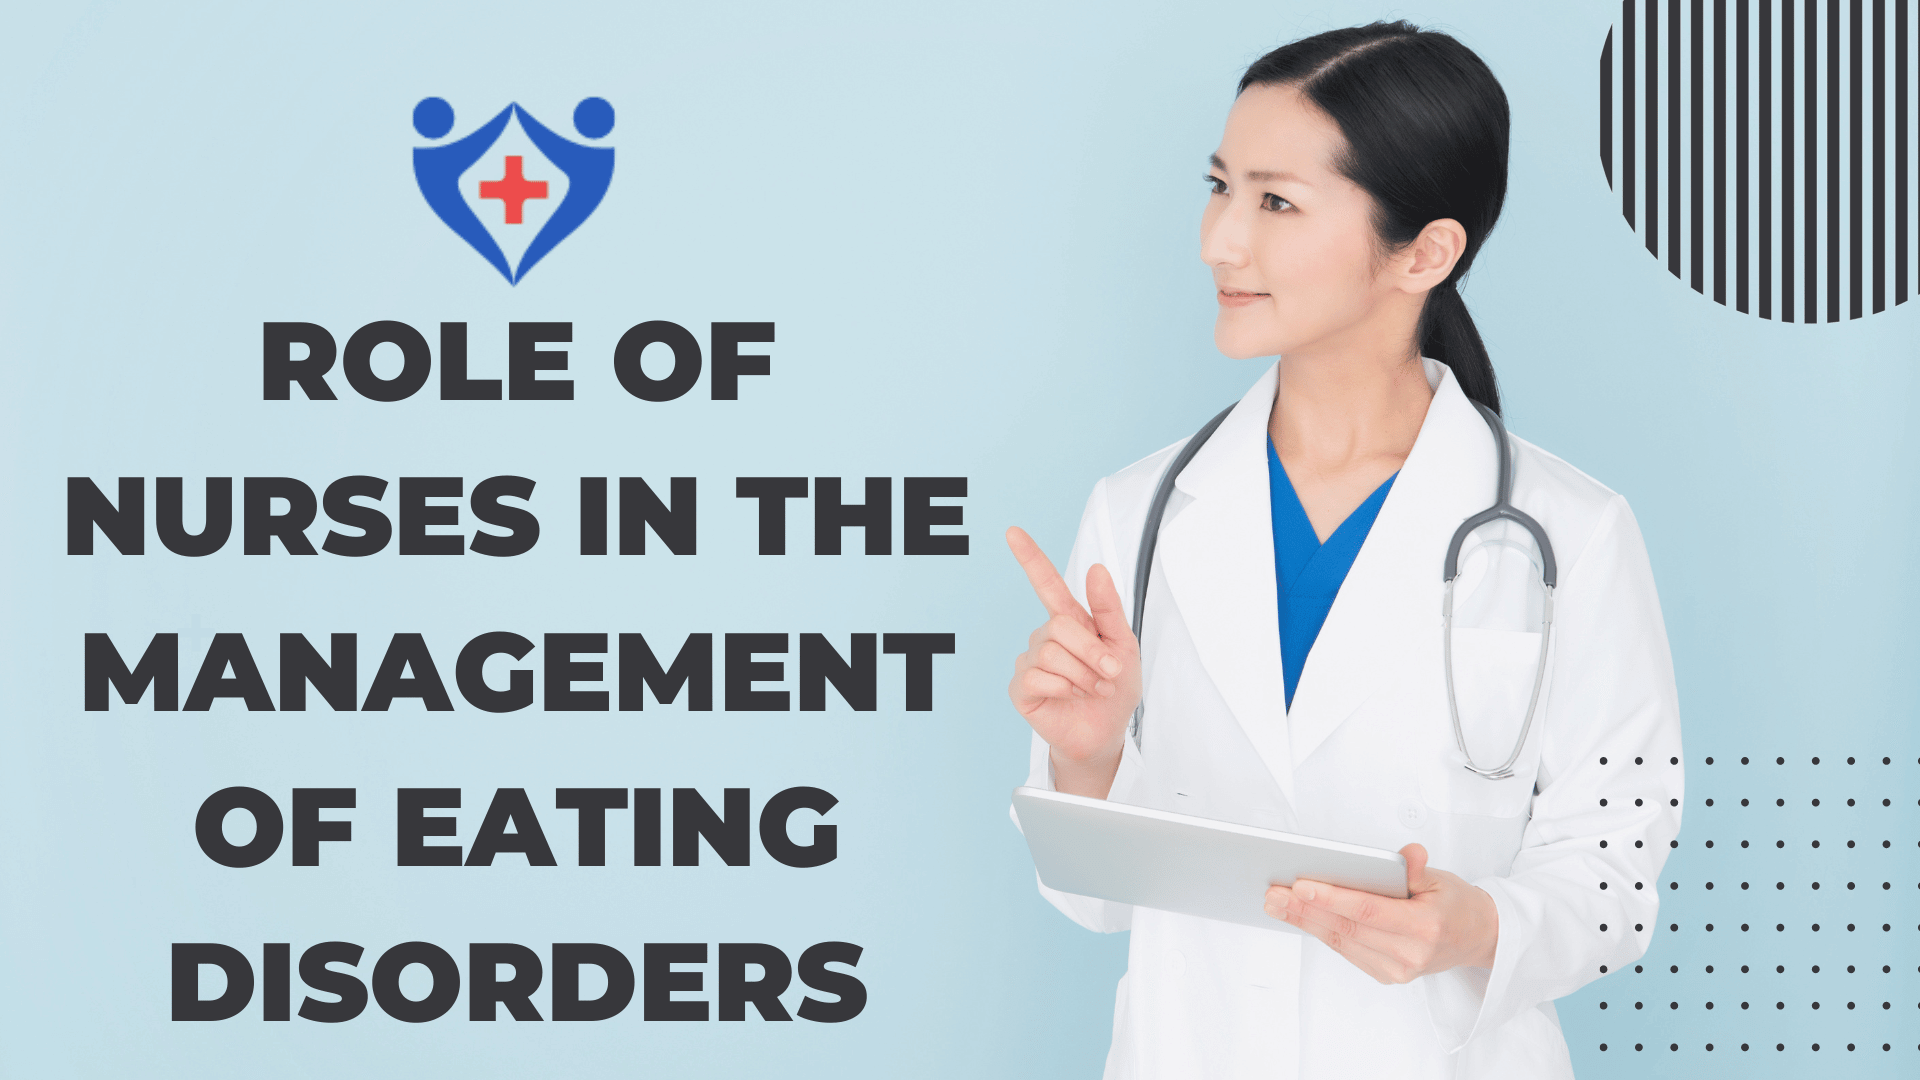 Role of Nurses in the Management of Eating Disorders